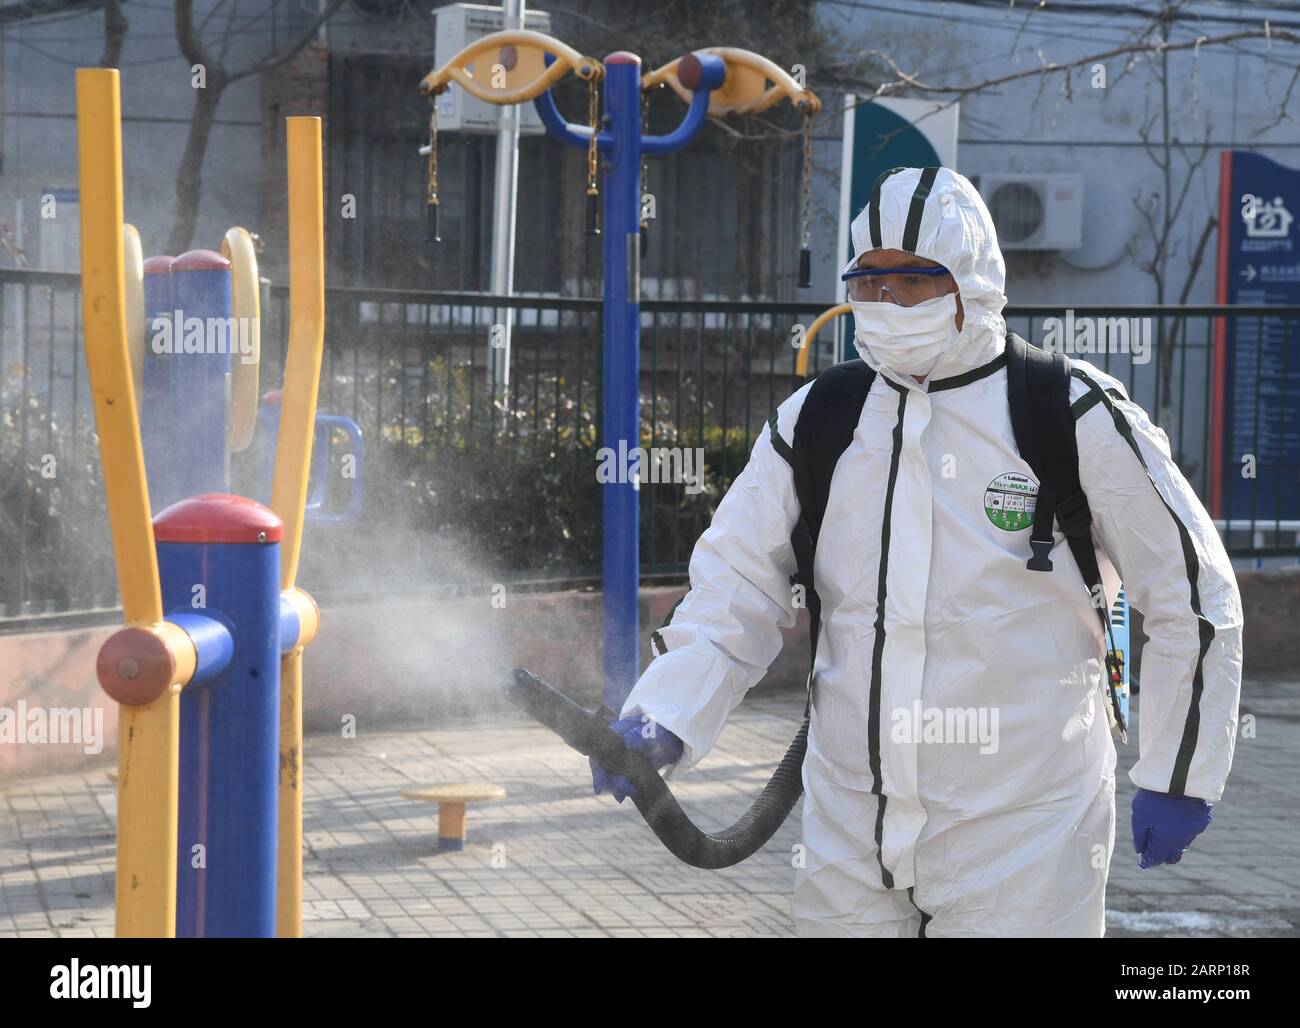 (200129) -- BEIJING, Jan. 29, 2020 (Xinhua) -- A staff member disinfects public fitness equipments at a community in Haidian District in Beijing, capital of China, Jan. 29, 2020. Haidian District of Beijing has carried out disinfection work with the help of professional staff at residential communities to curb the spread of the novel coronavirus. (Xinhua/Ren Chao) Stock Photo